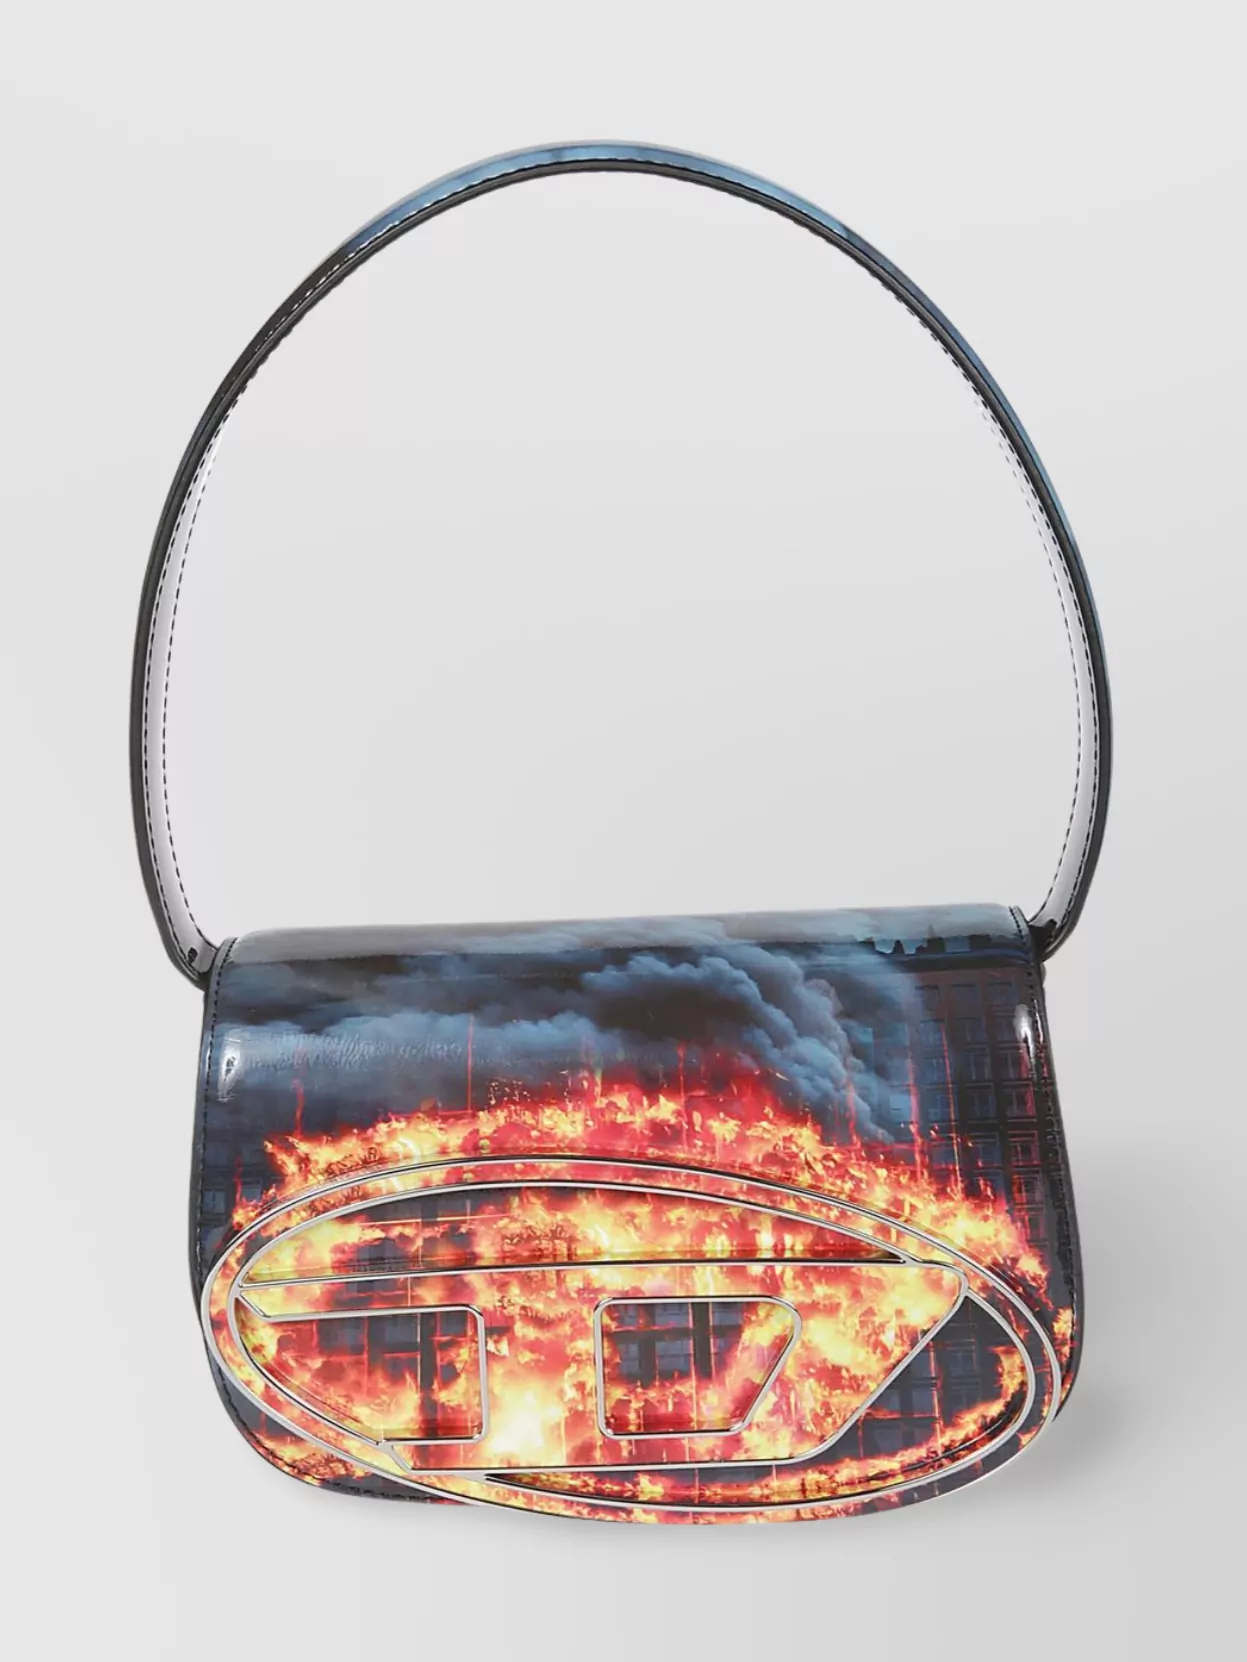 Diesel Shoulder Bag With Chain Strap And Curved Silhouette